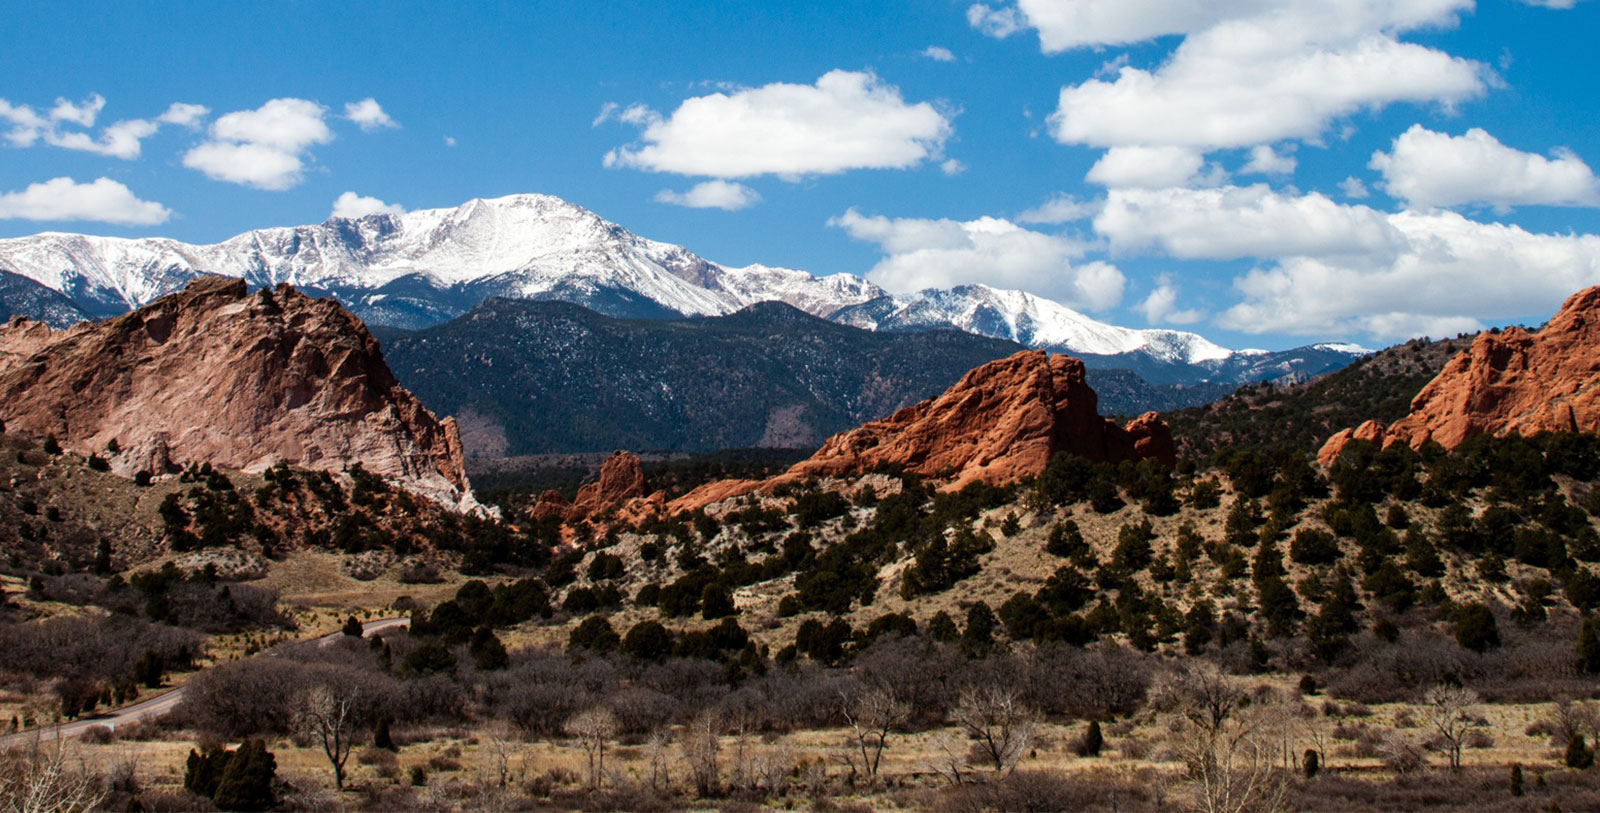 Experience the beauty of Garden of the Gods, and enjoy the 21 miles of trails the park offers.